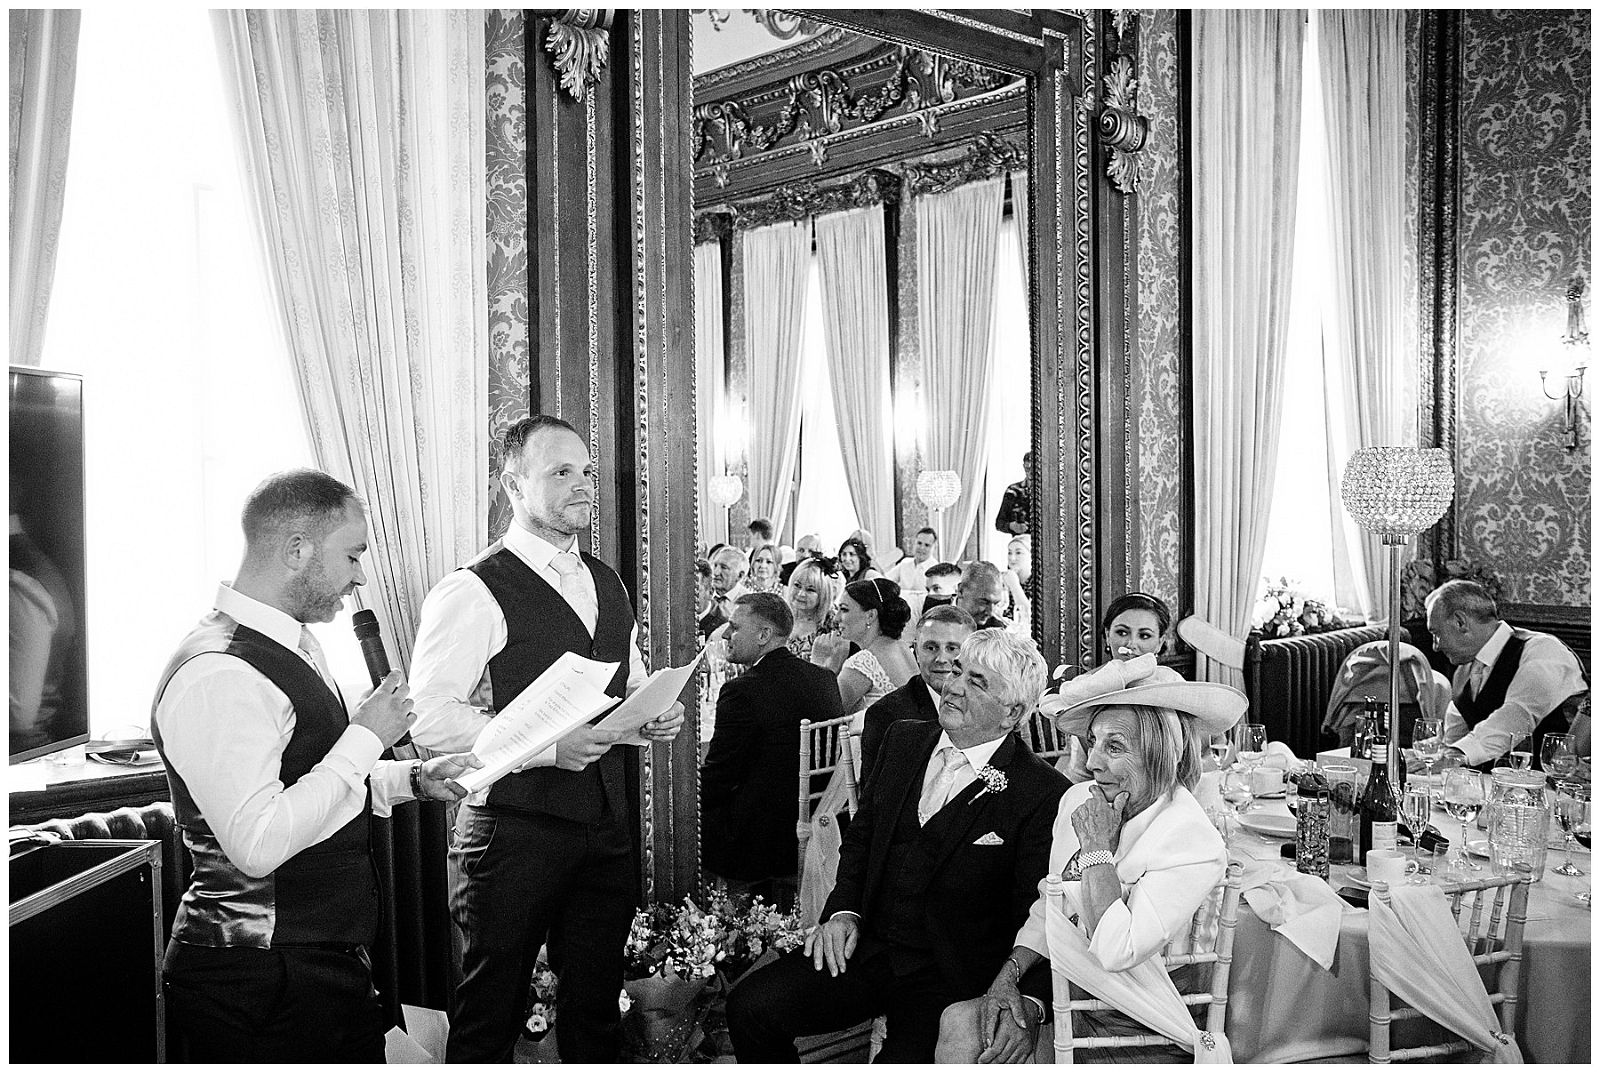 Brilliant speeches by Moz and Taur as best men, eliciting brilliant guest and couple reactions at Hawkstone Hall in Shrewsbury by Documentary Wedding Photographer Stuart James